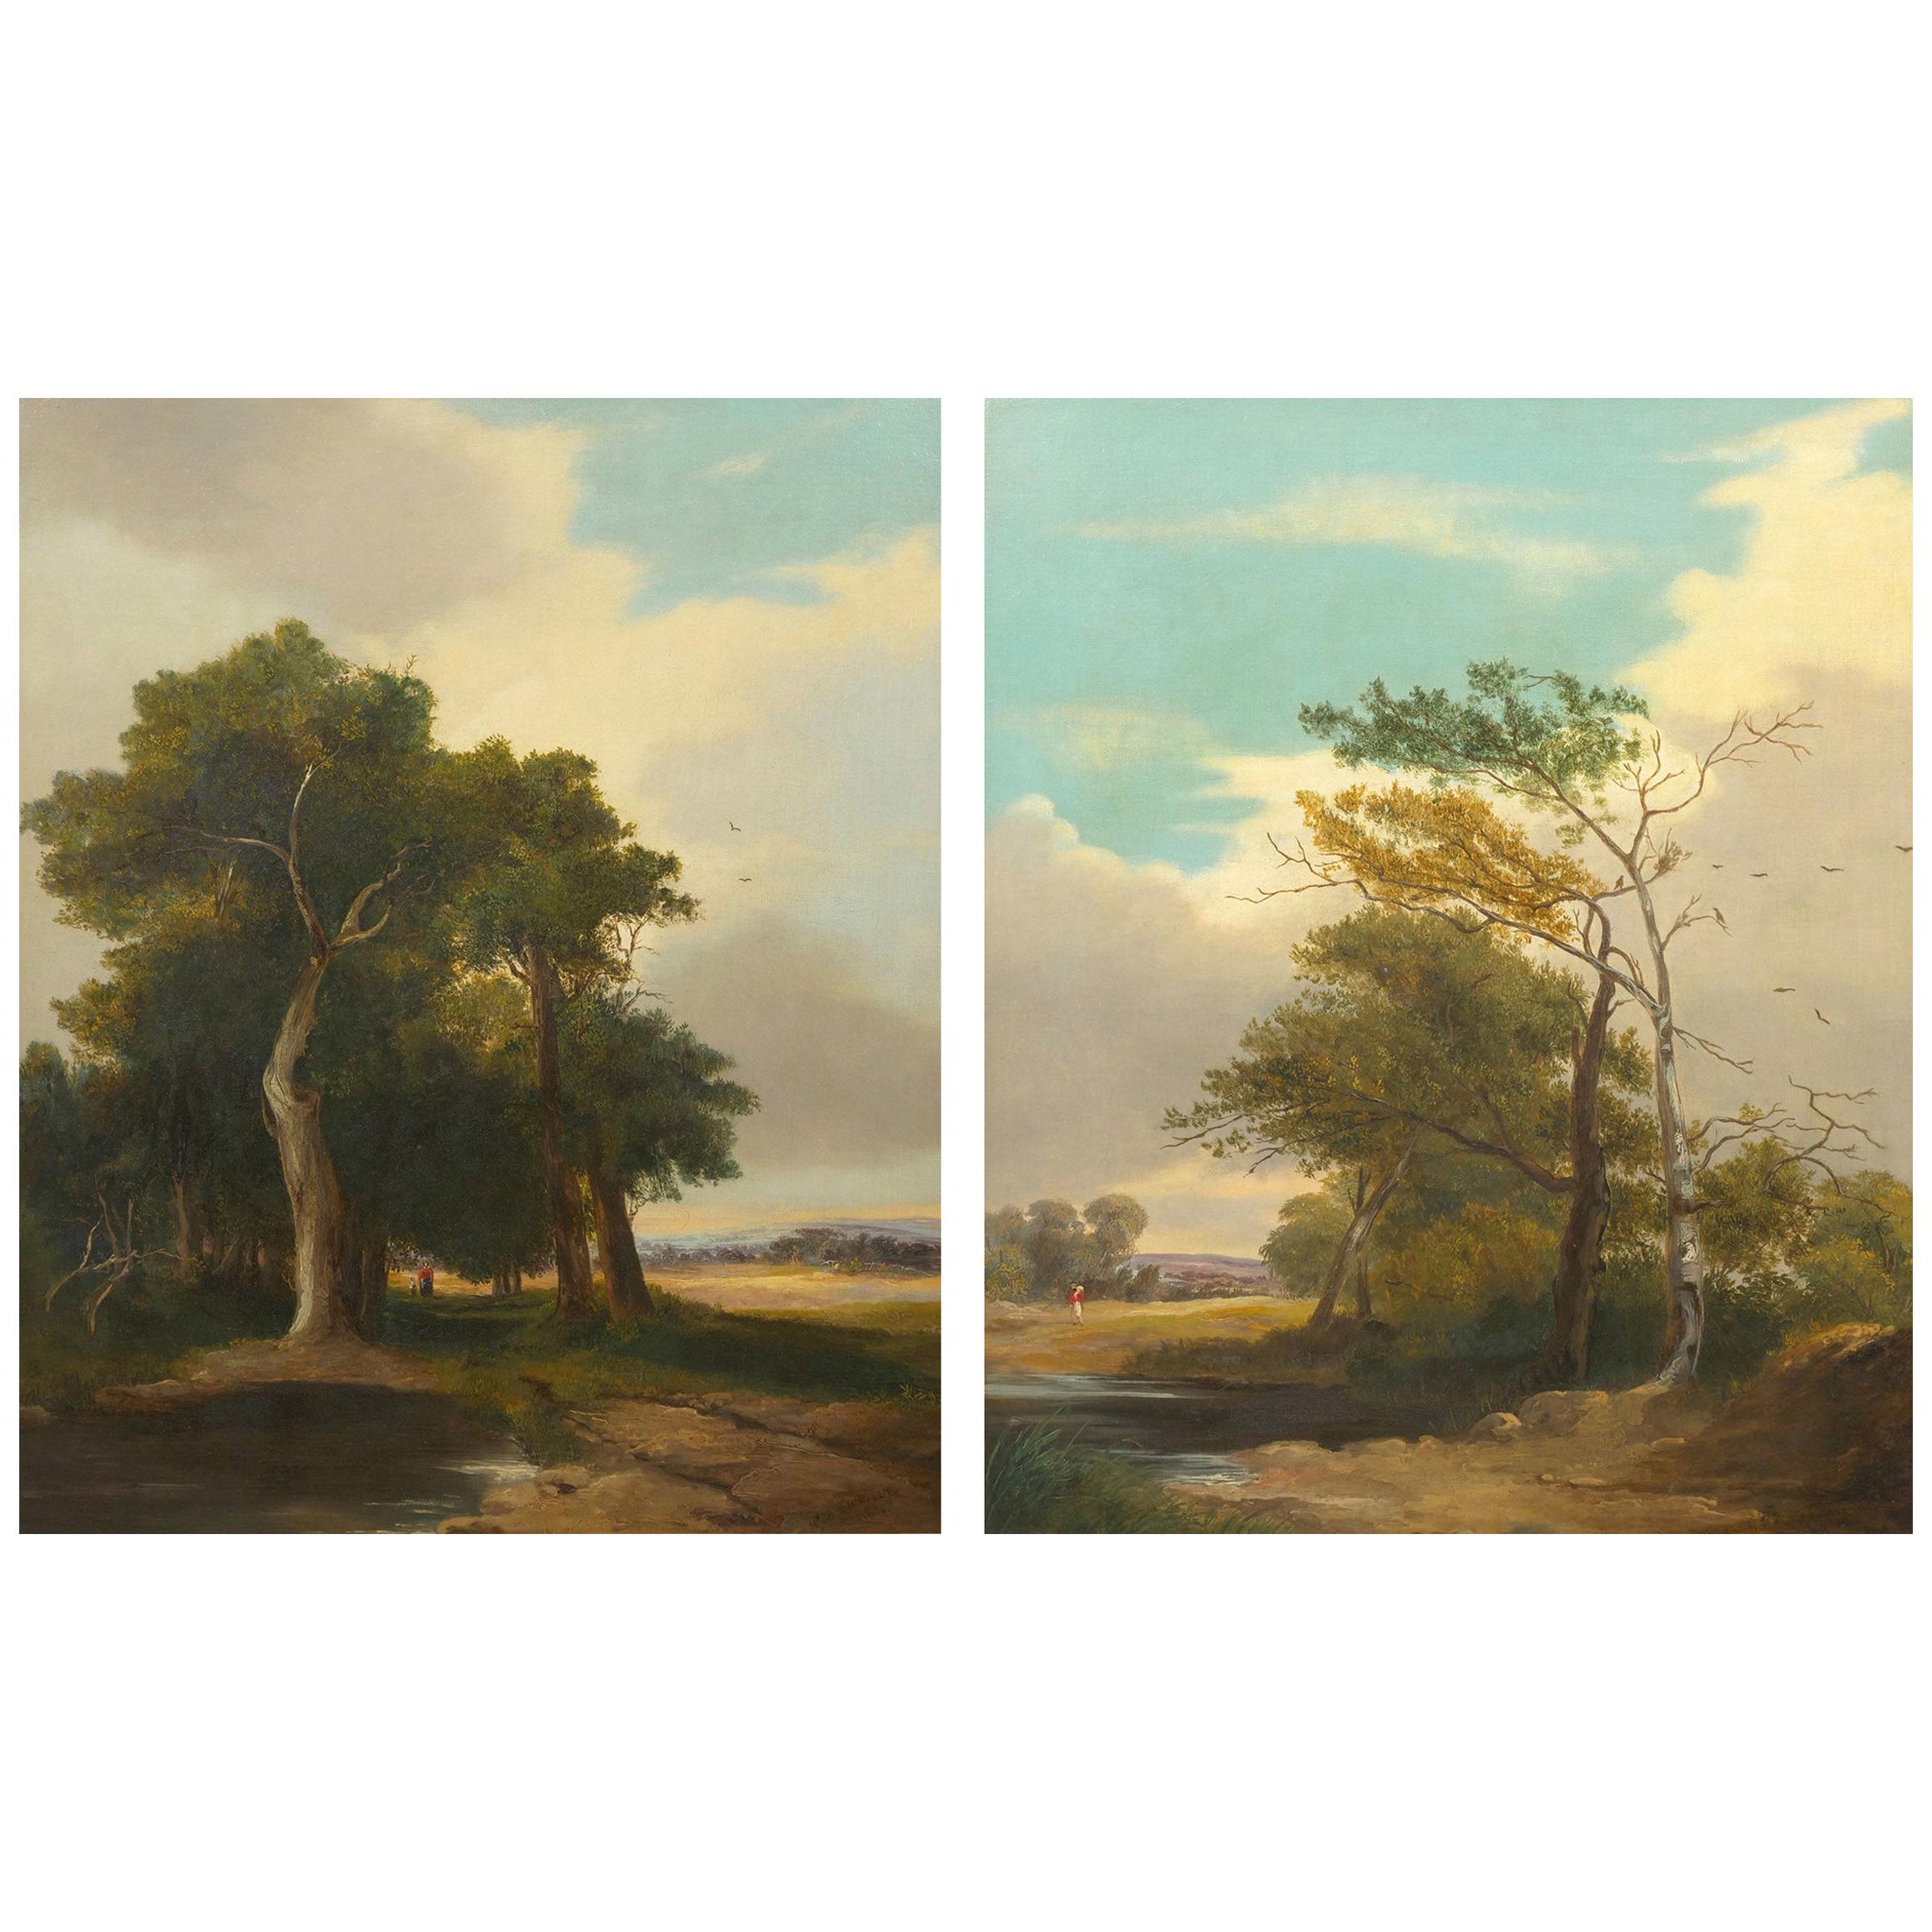 Pair of Antique English Landscape Paintings circa 1843 by G.A. Turner